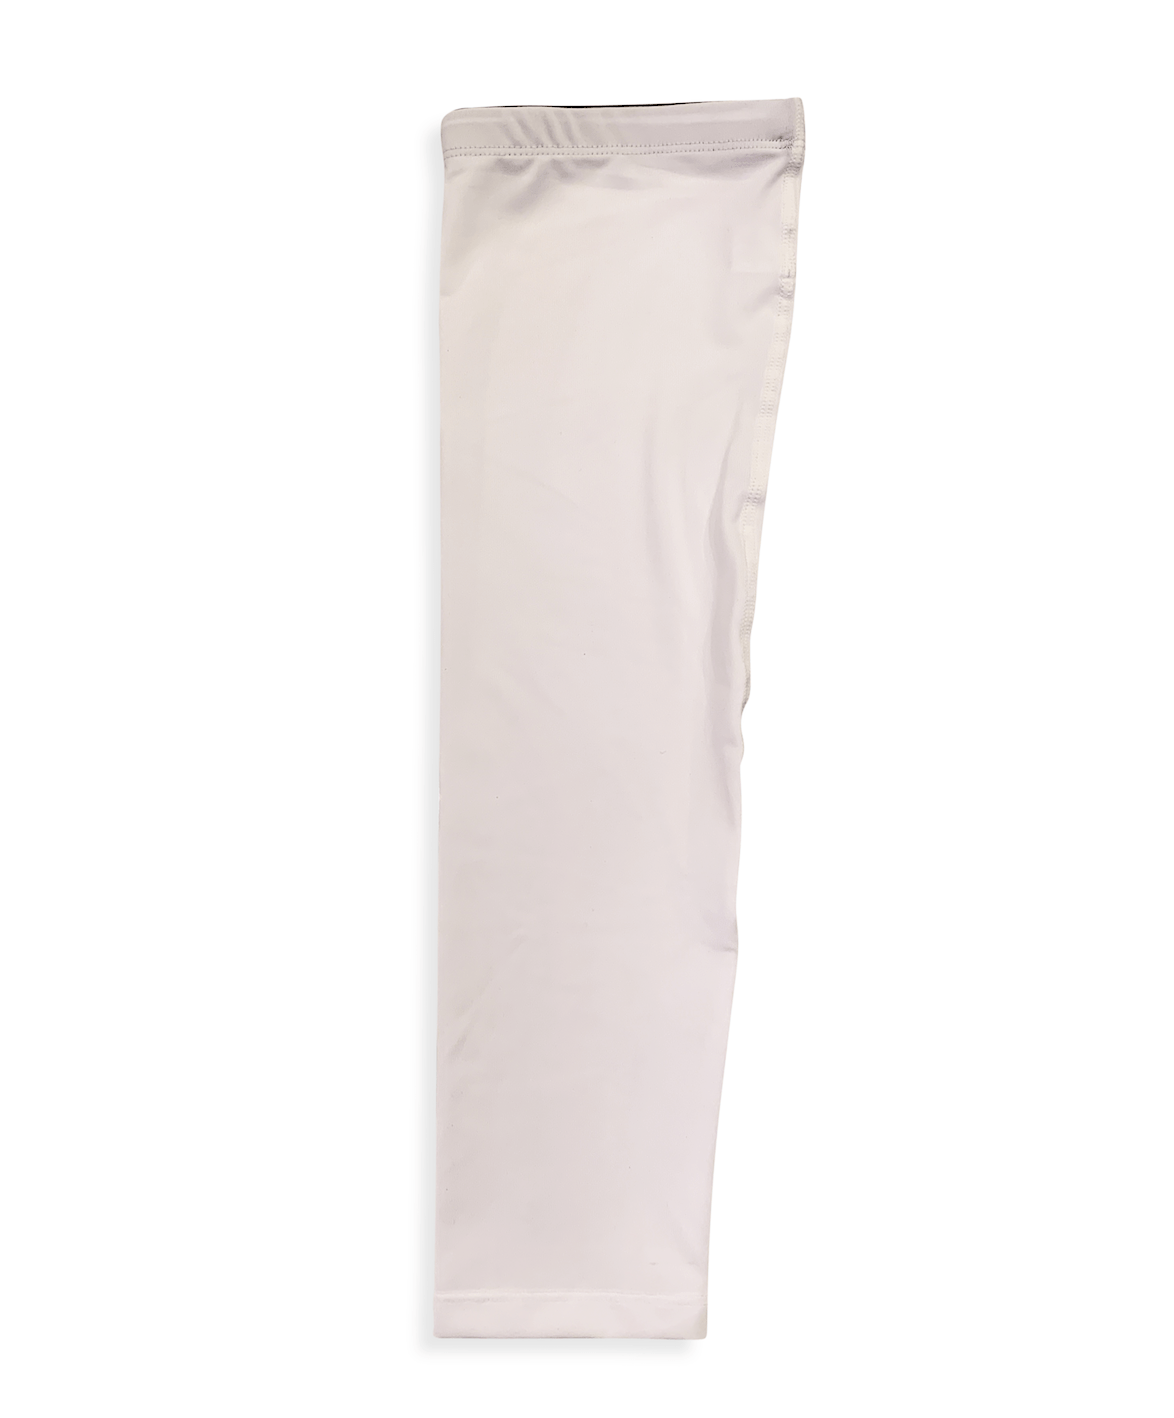 Blank Leg Sleeves for Sublimation